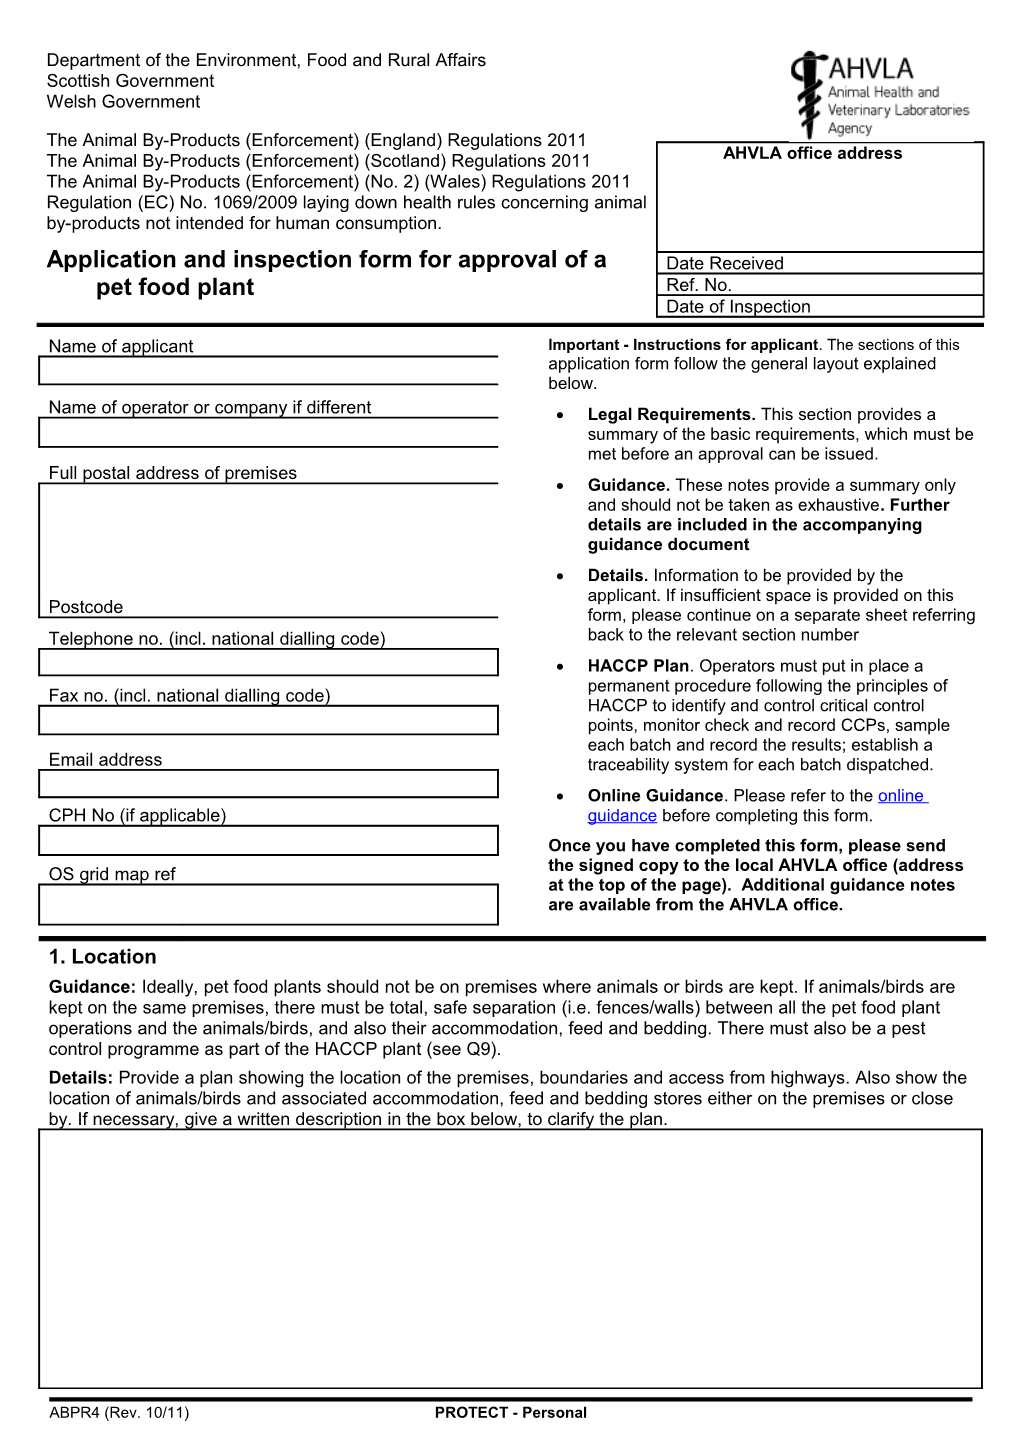 Application and Inspection Form for Approval of a Pet Food Plant